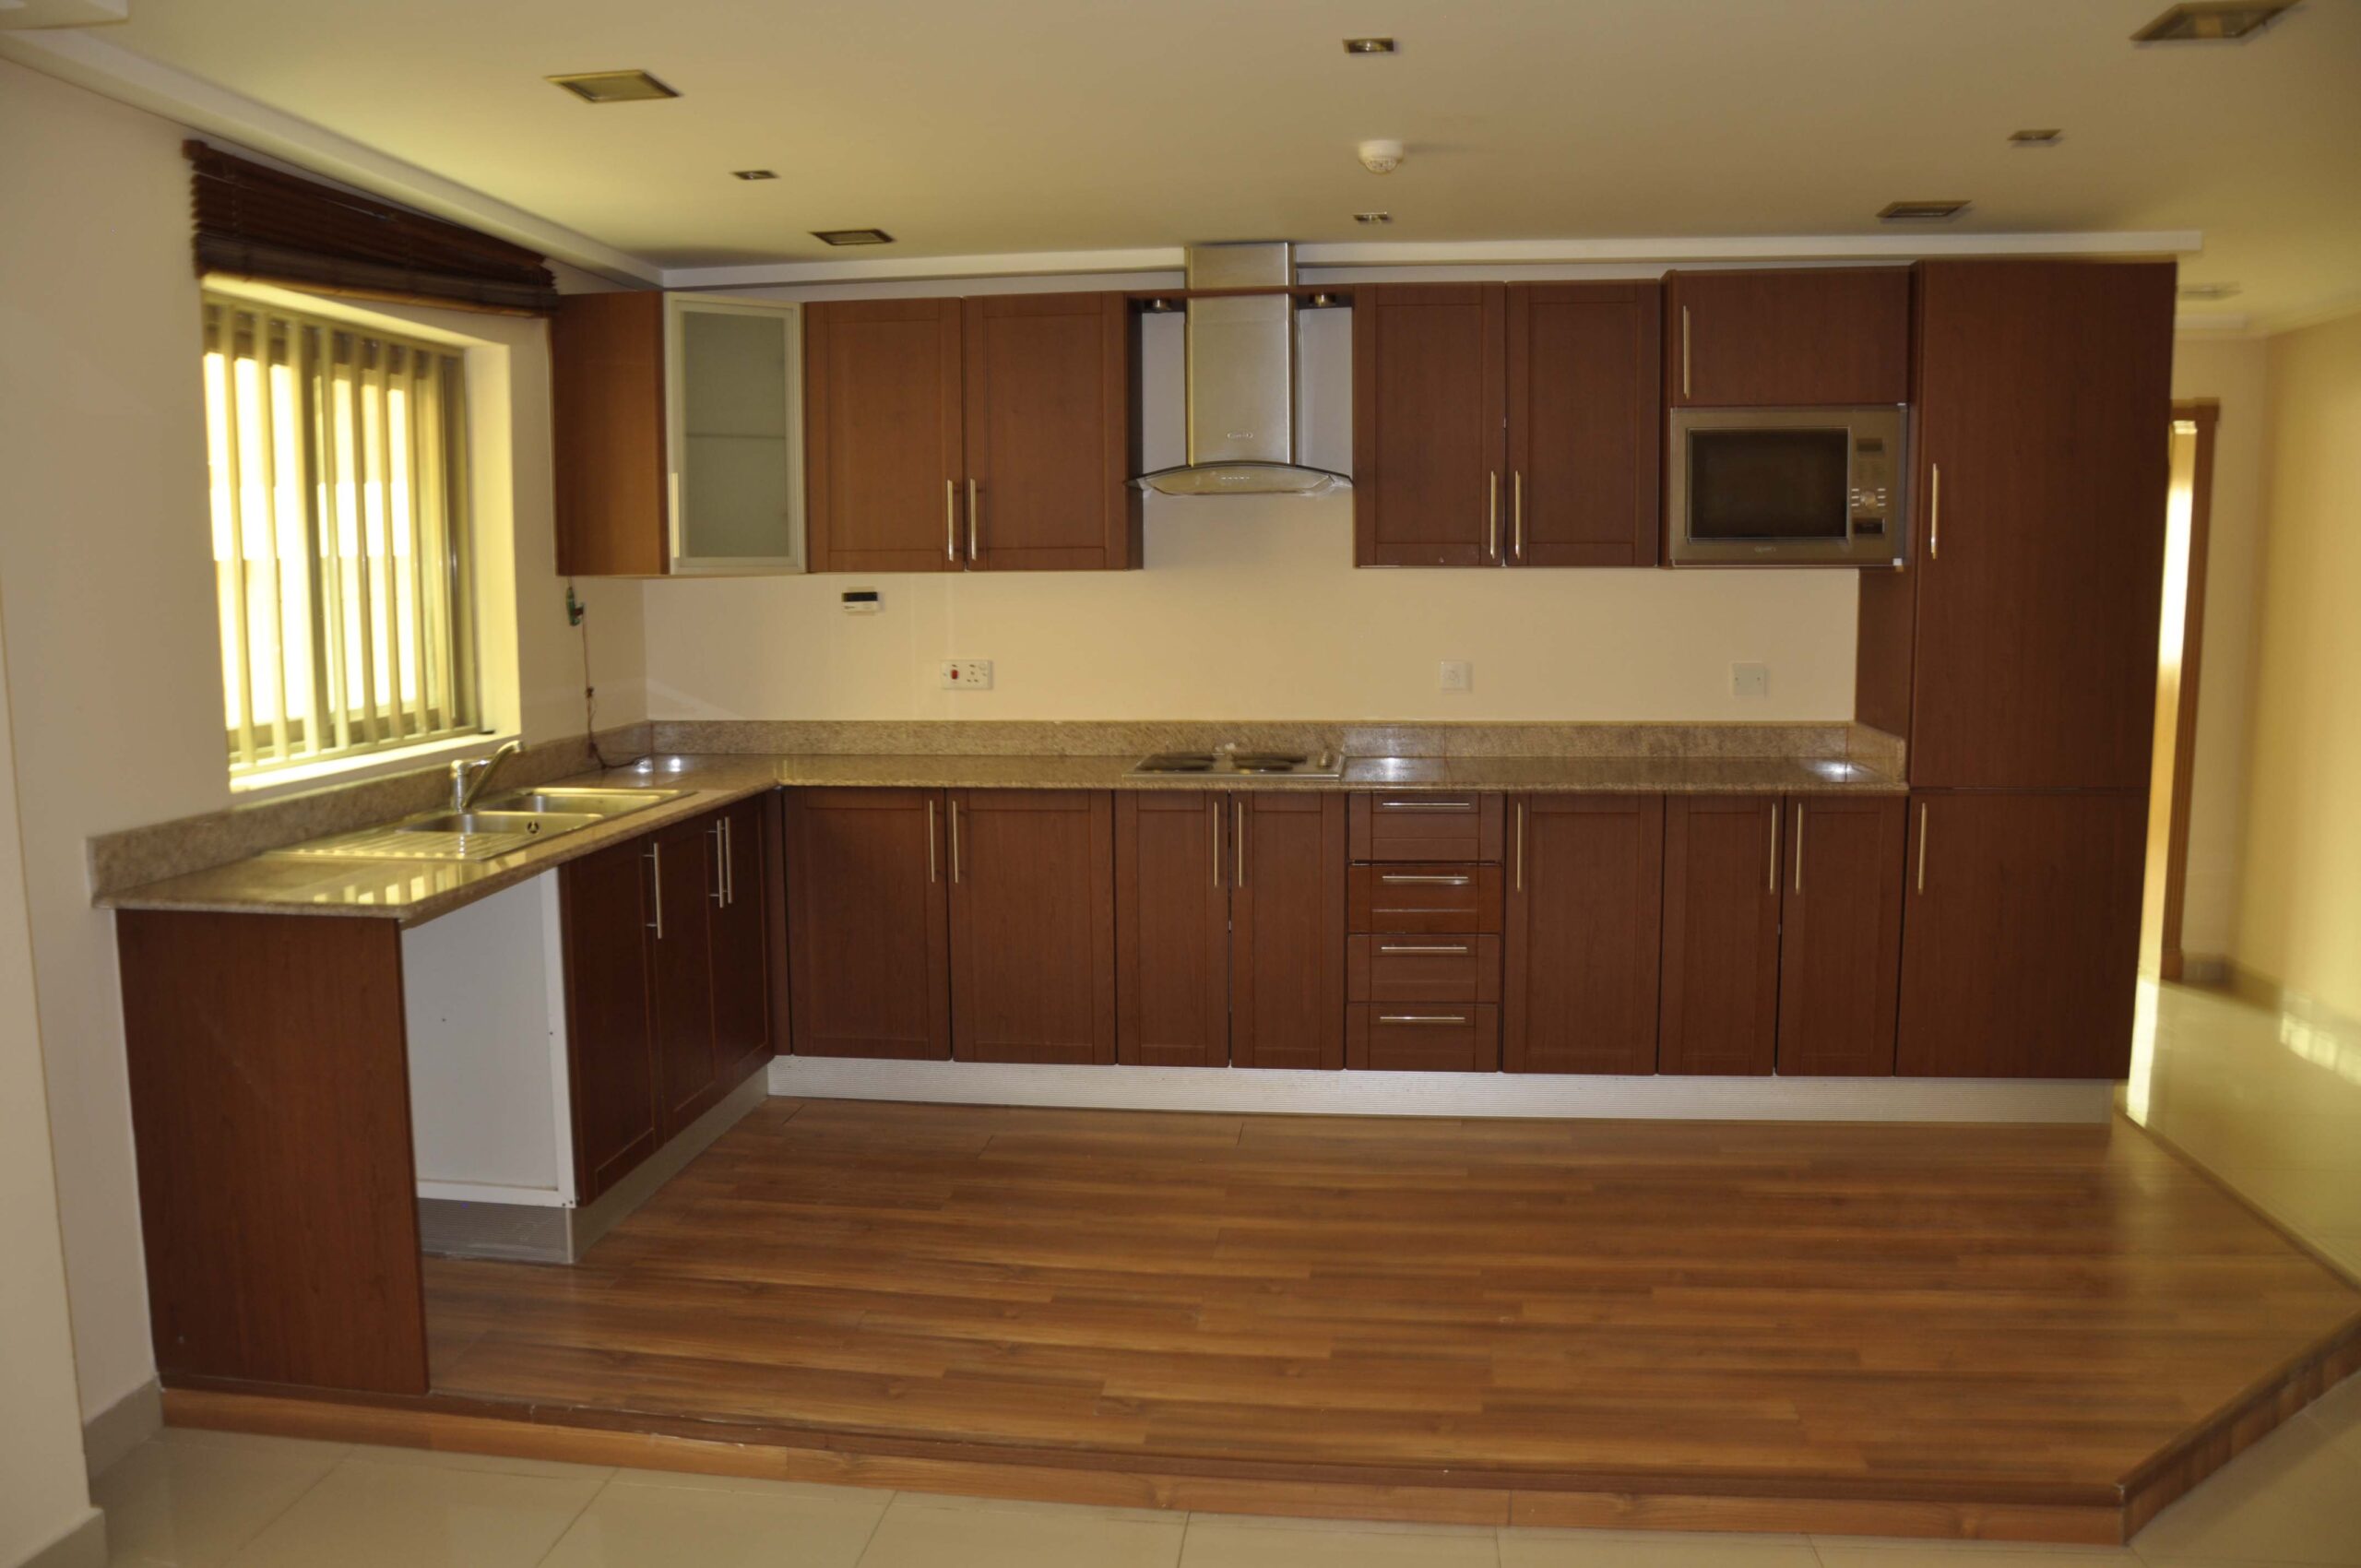 Luxury flat for rent simi-furnished in Bu Quwah (Saraya 2) offered for BD 260 /- per month